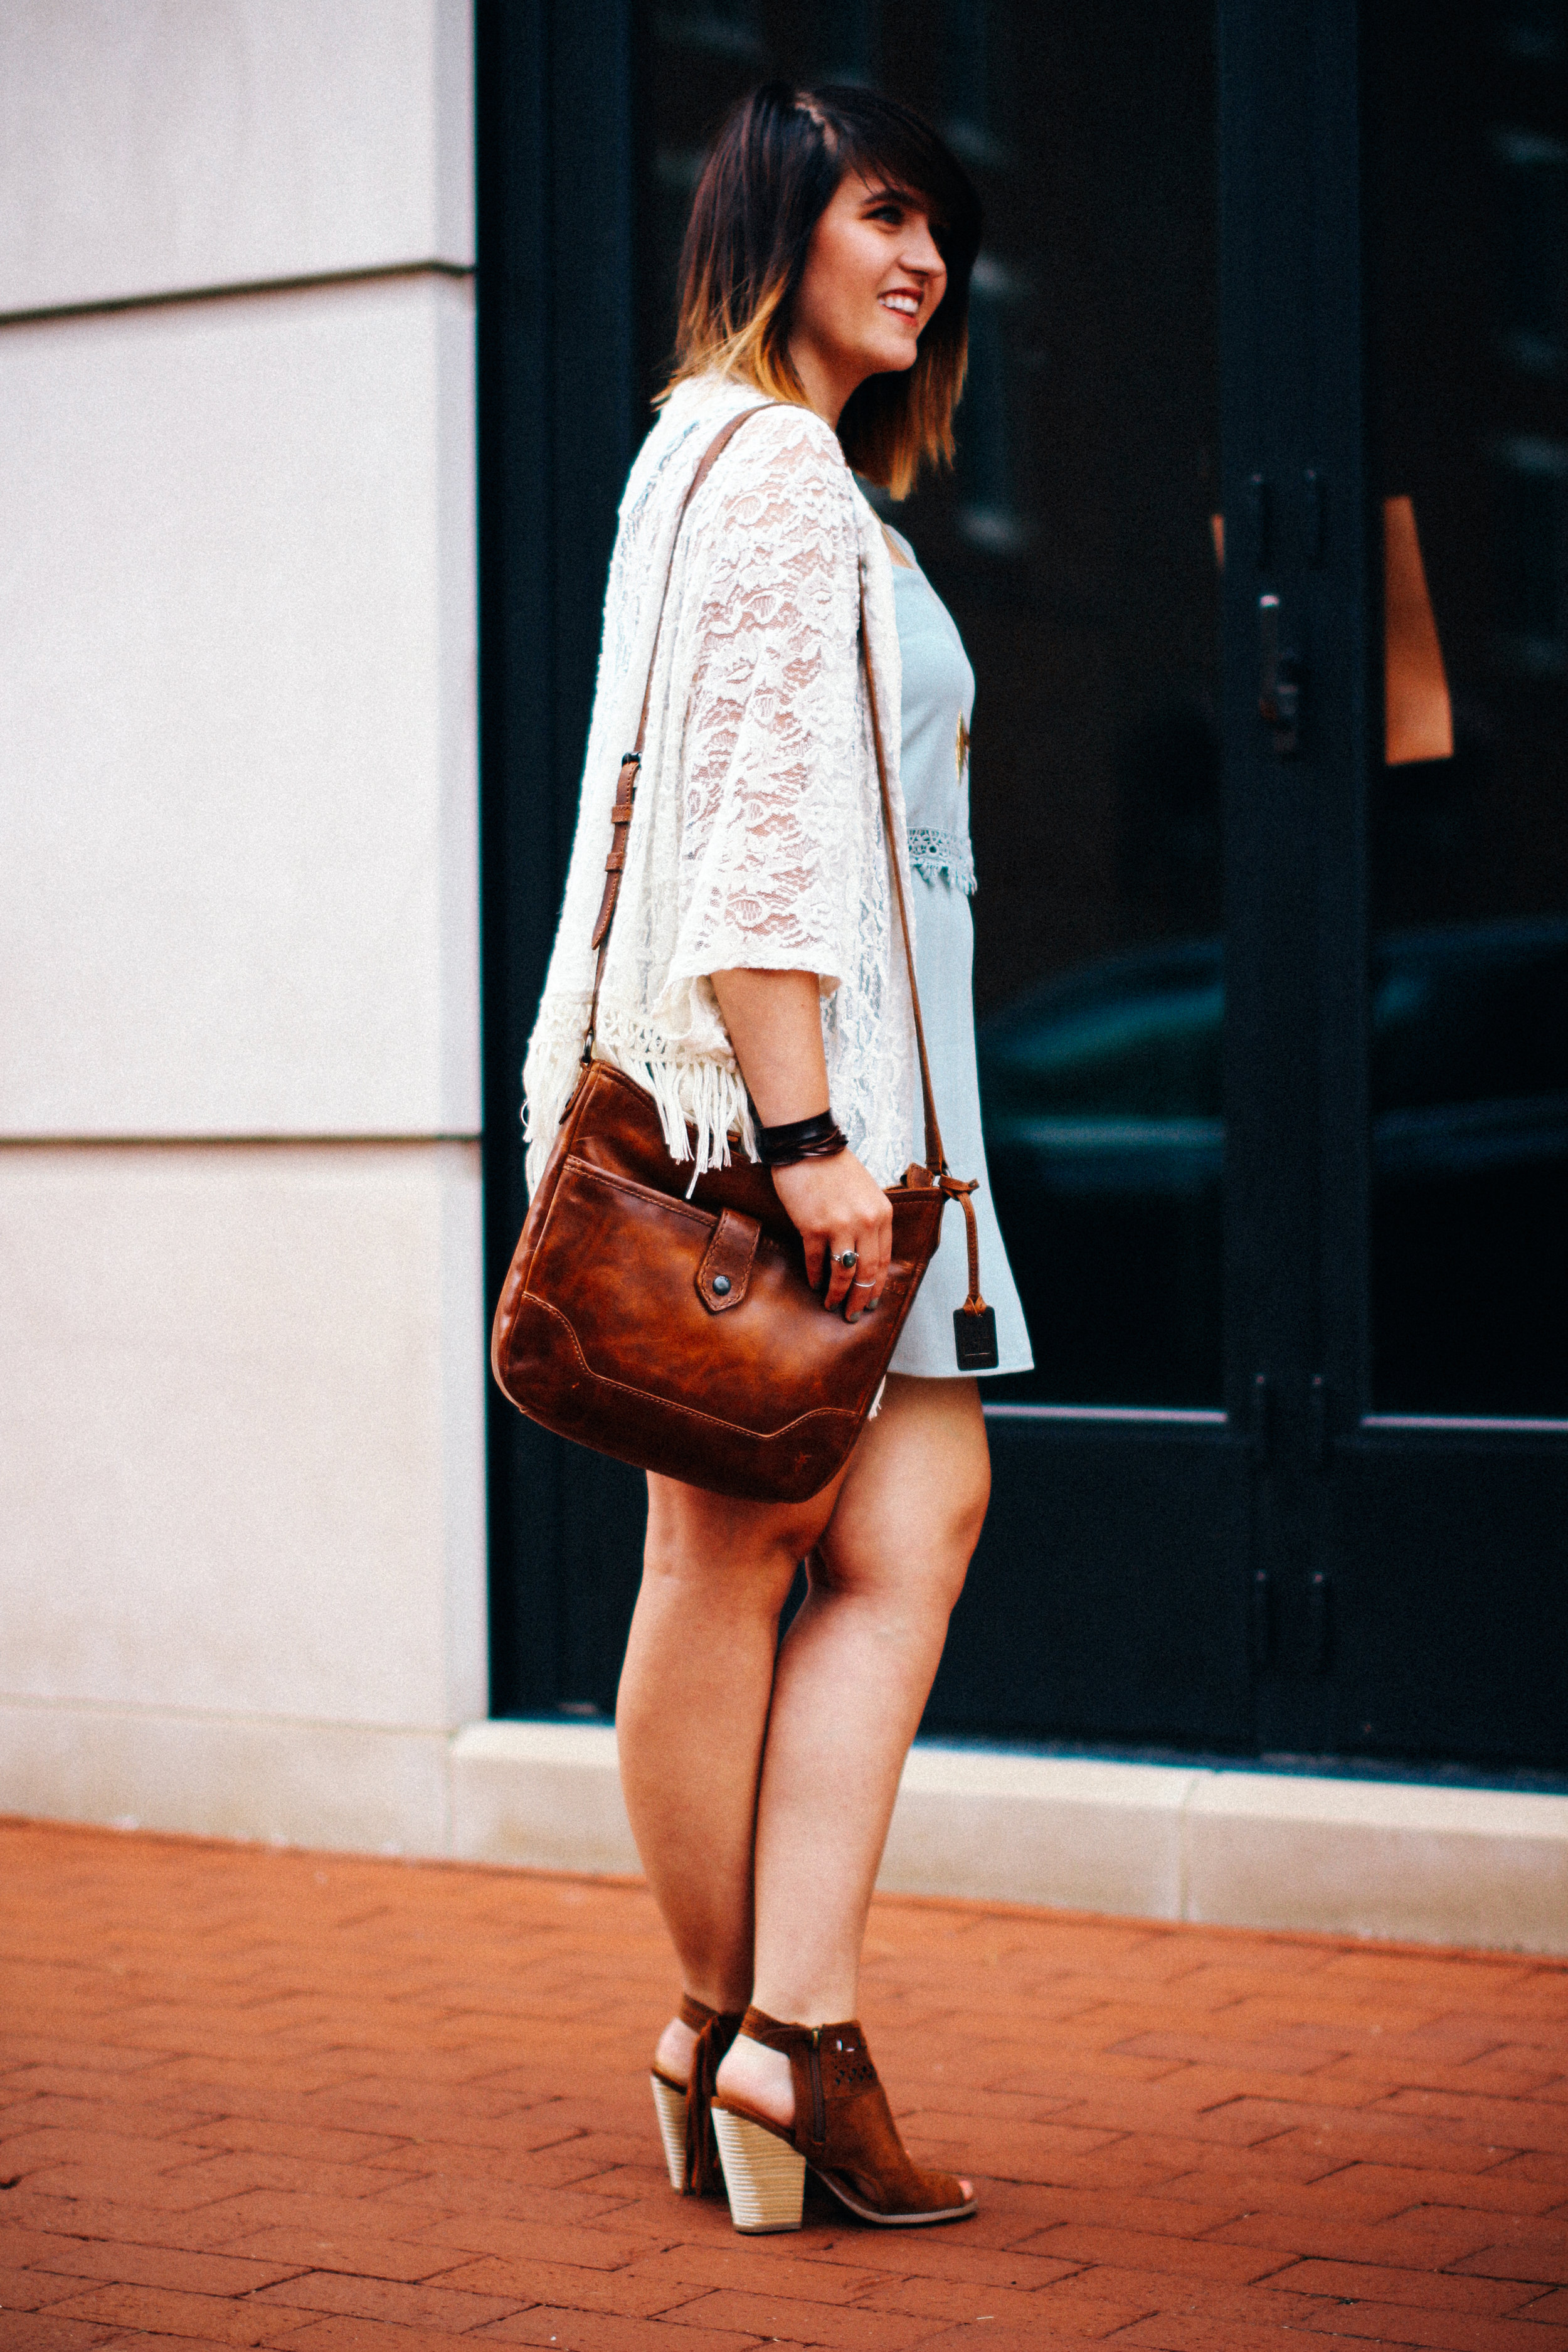 Leather + Lace Fall Style via chelceytate.com / @forever21 @thefryecompany @modcloth @americaneagle